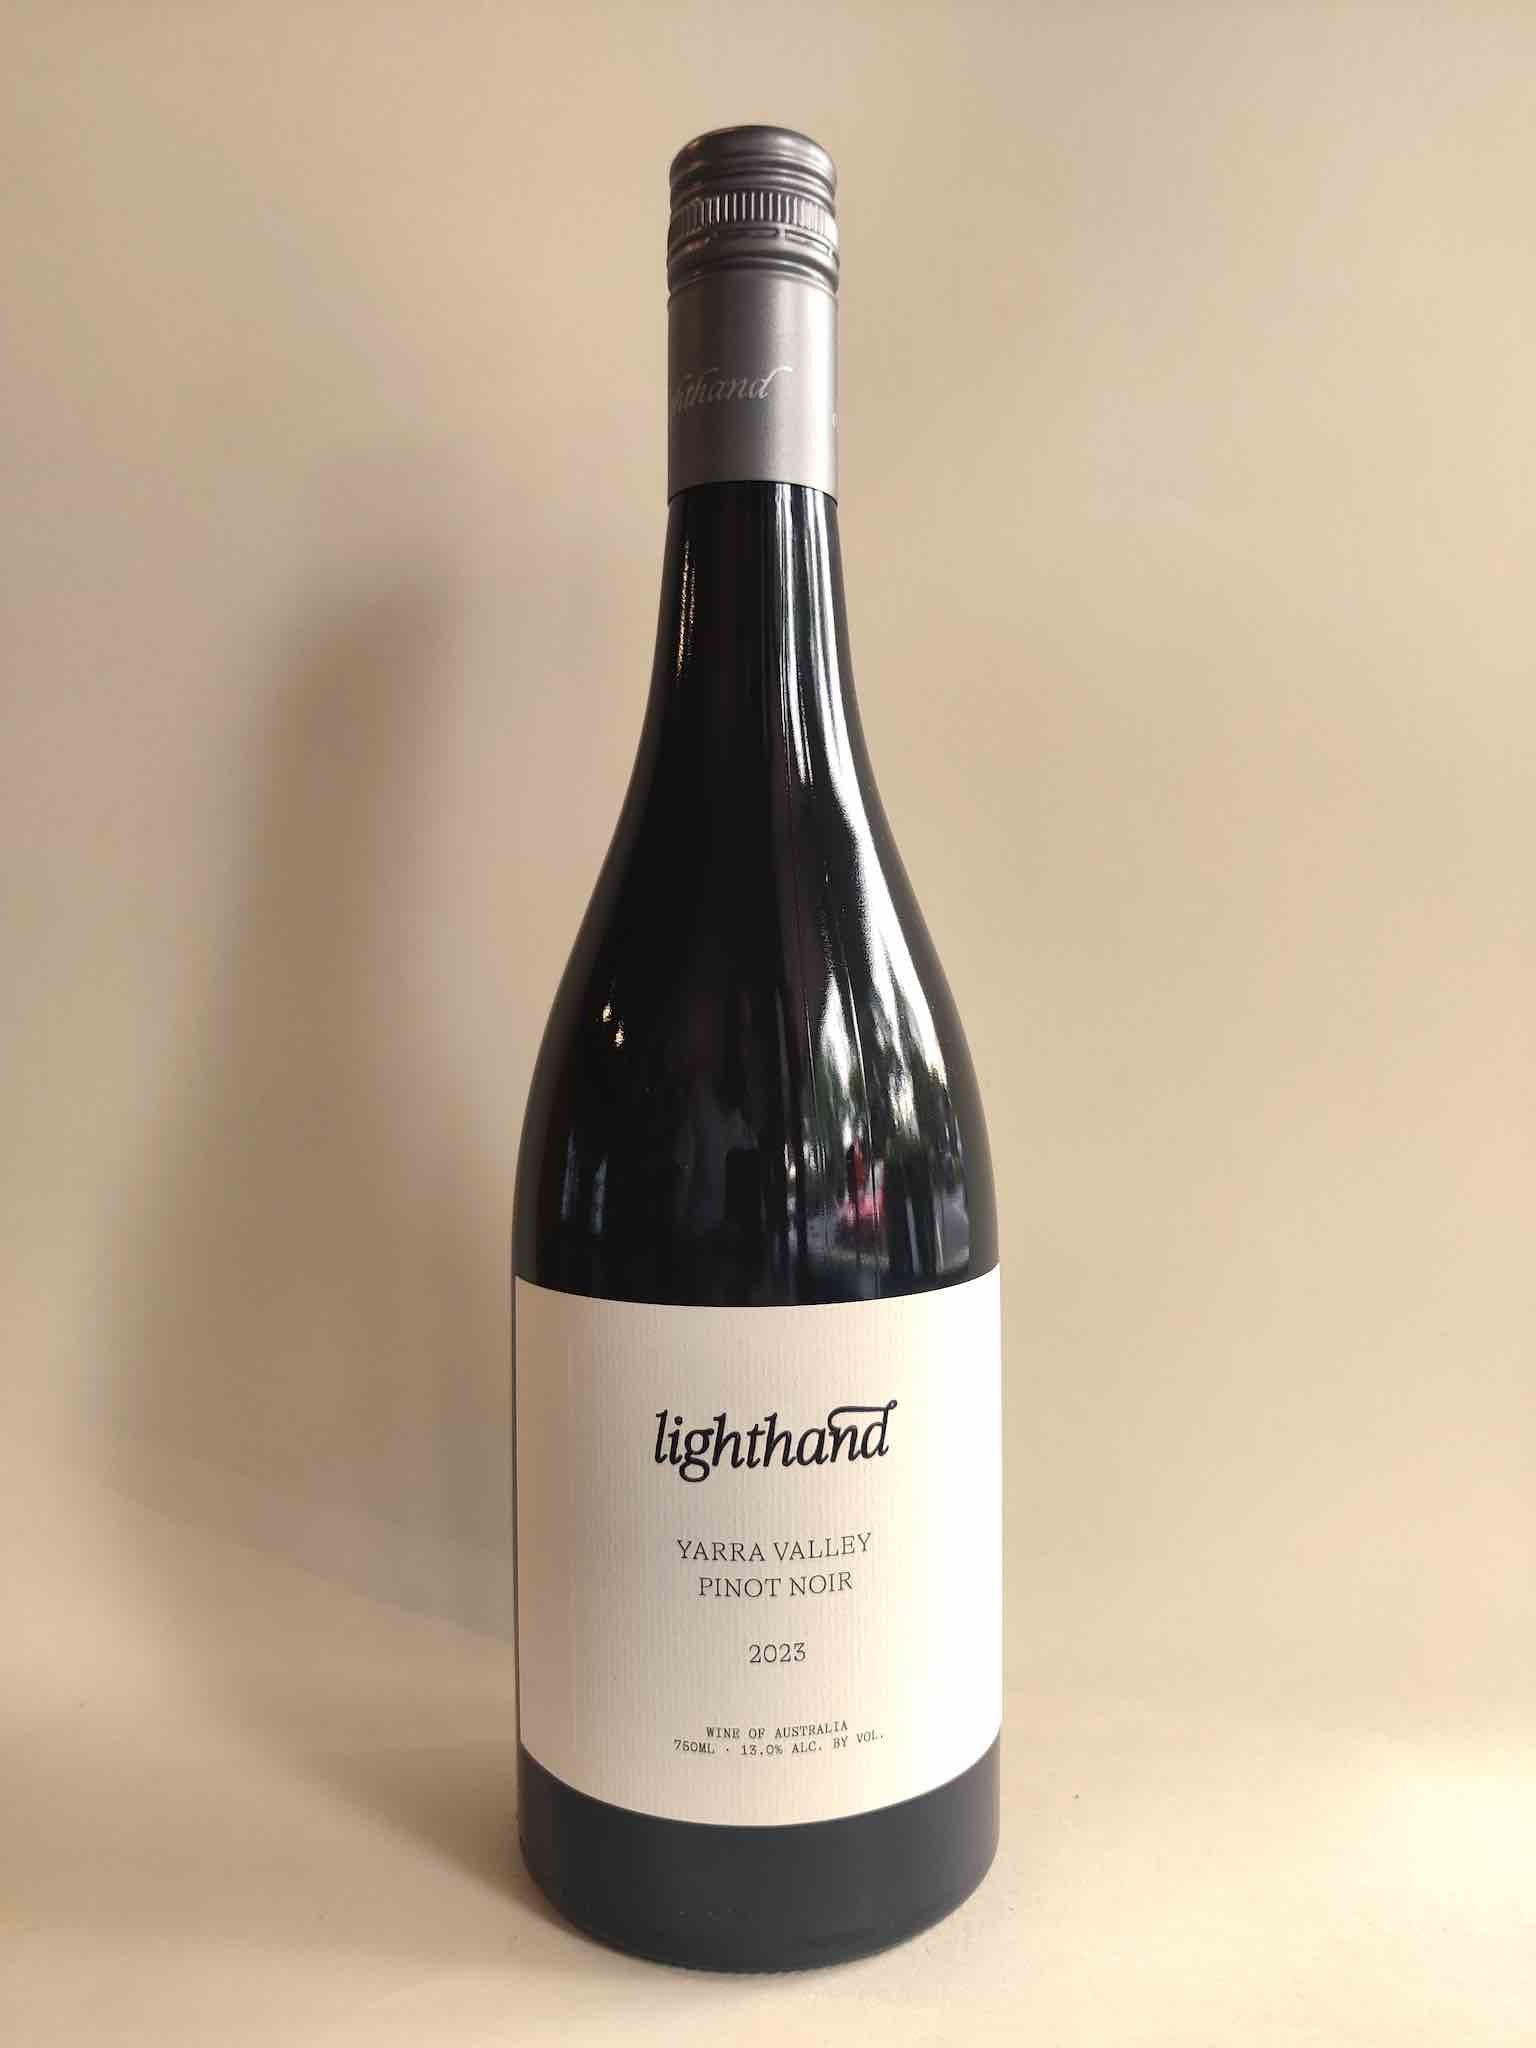 A 750ml bottle of 2022 Lighthand Pinot Noir from the Yarra Valley, Victoria.